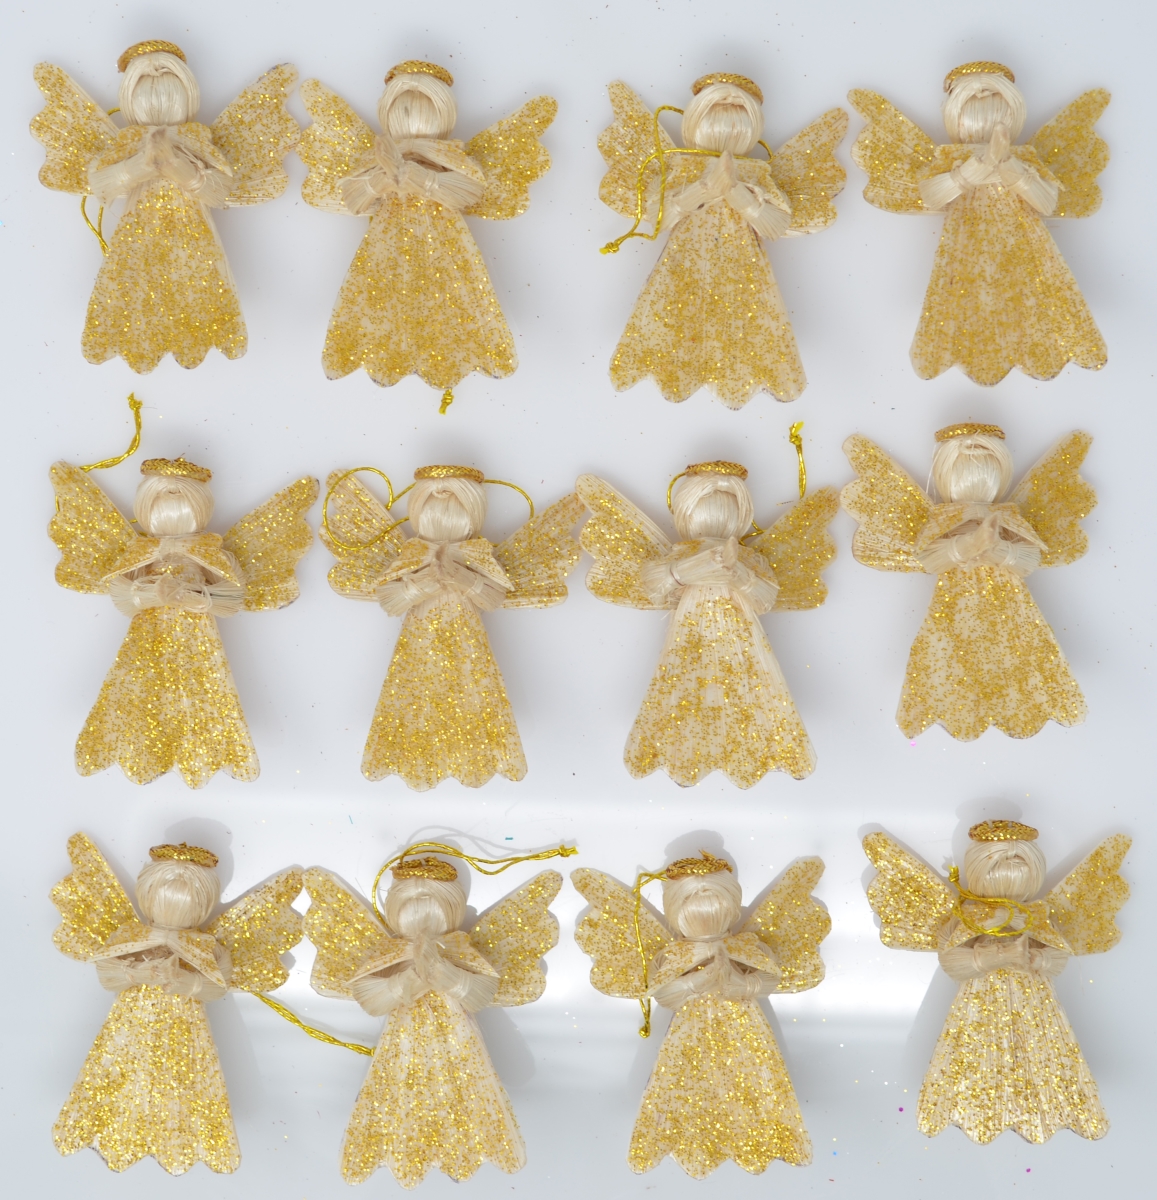 Angel0116 2 In. Argel Angel Figurines, Natural With Gold Dust - 12 Piece